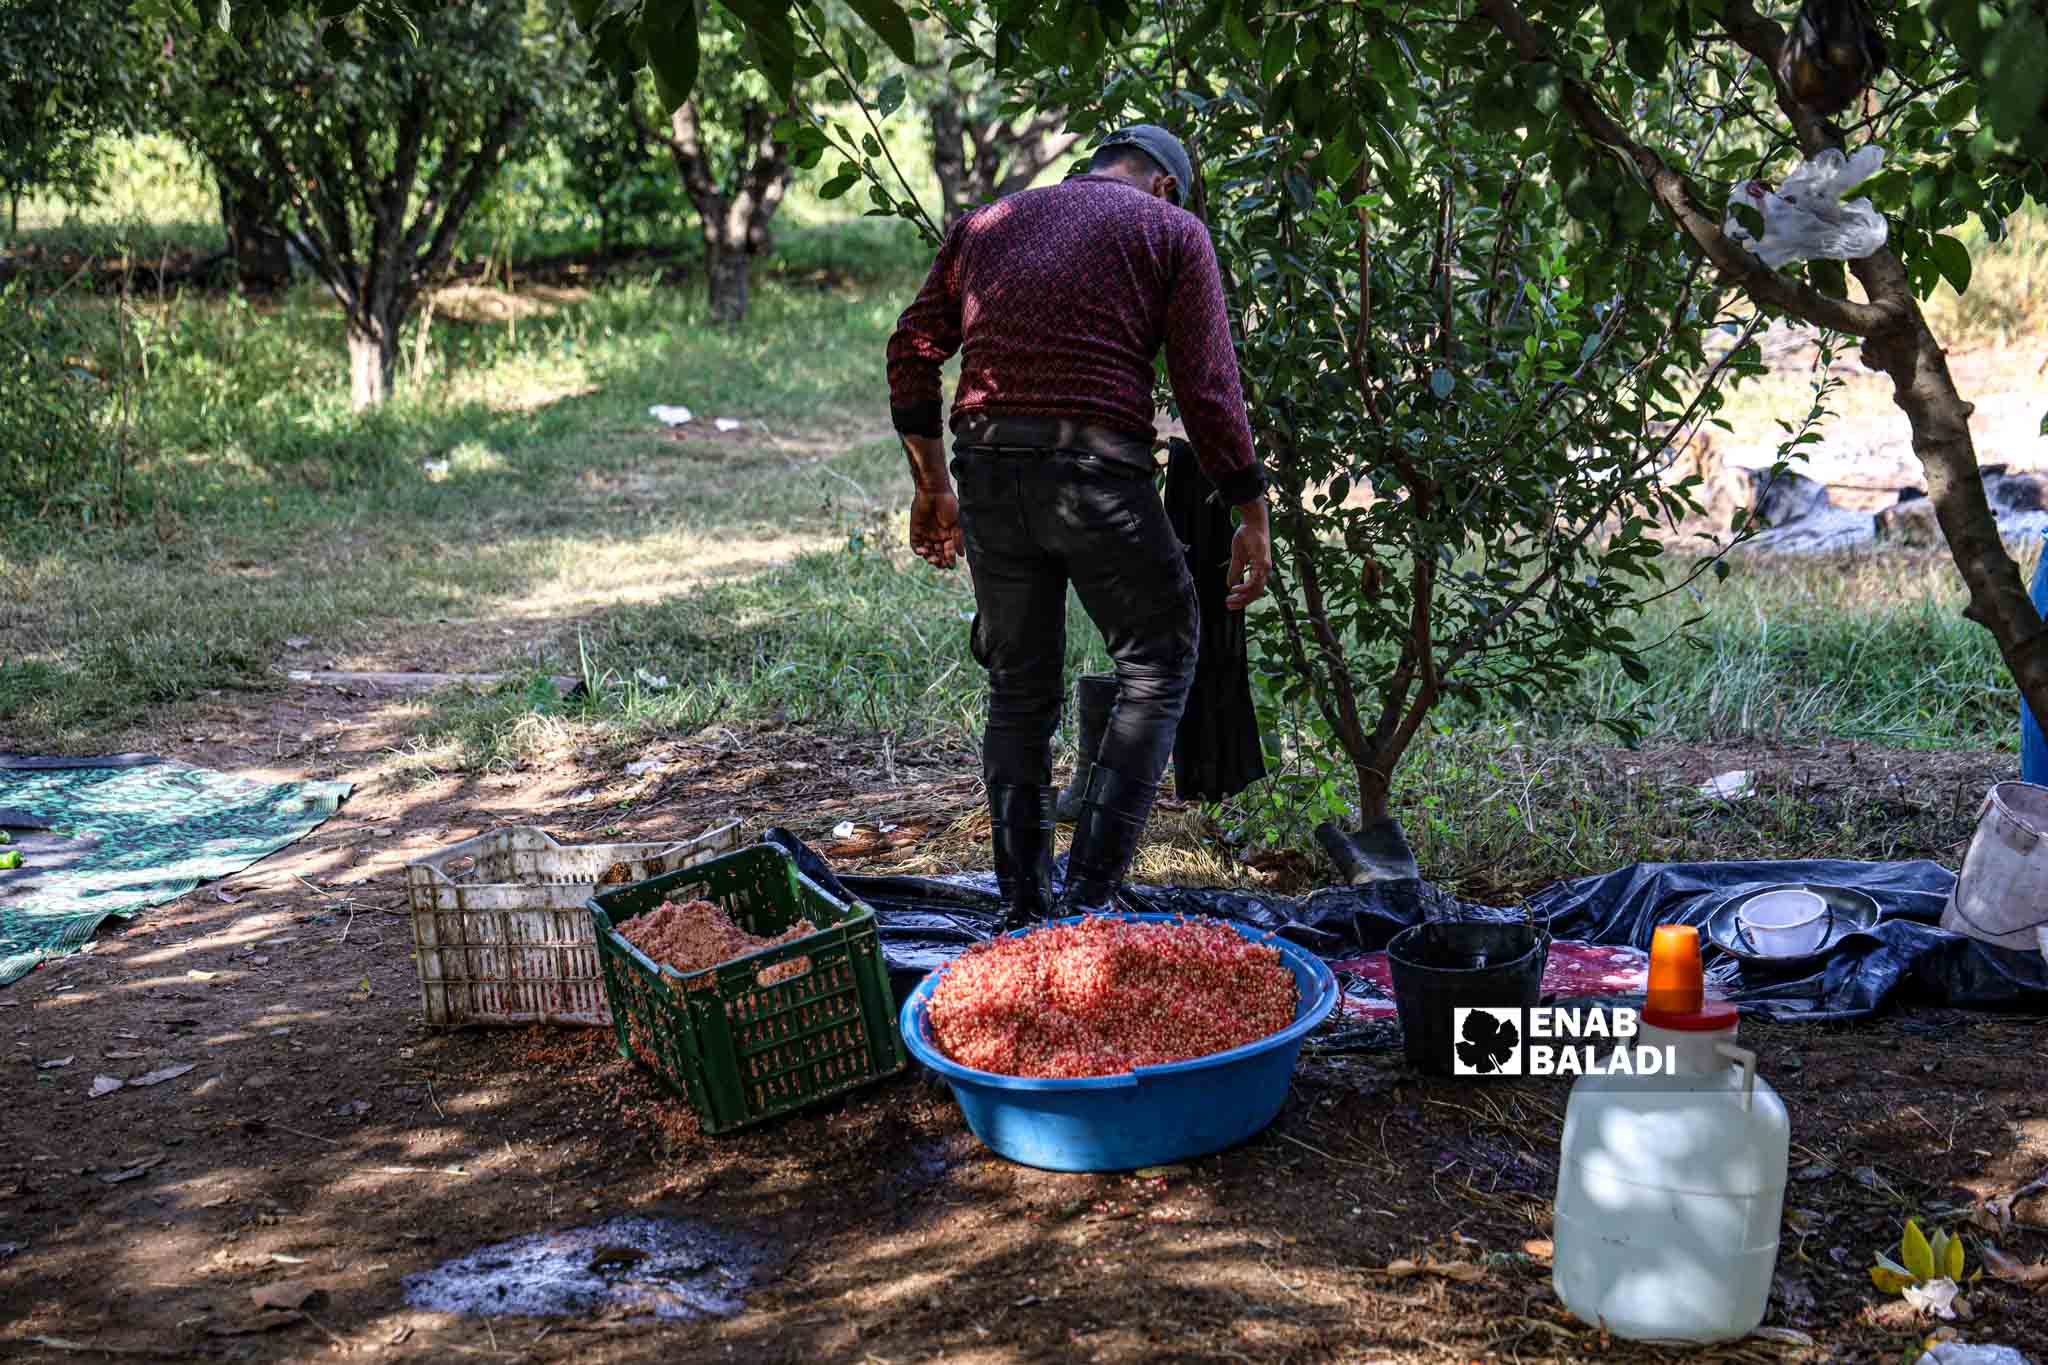 A farmer squeezes pomegranates in the traditional way to use later in the making of molasses in Basoutah village in Afrin region, Aleppo countryside - 18 October 2022 (Enab Baladi / Amir Kharboutli)
